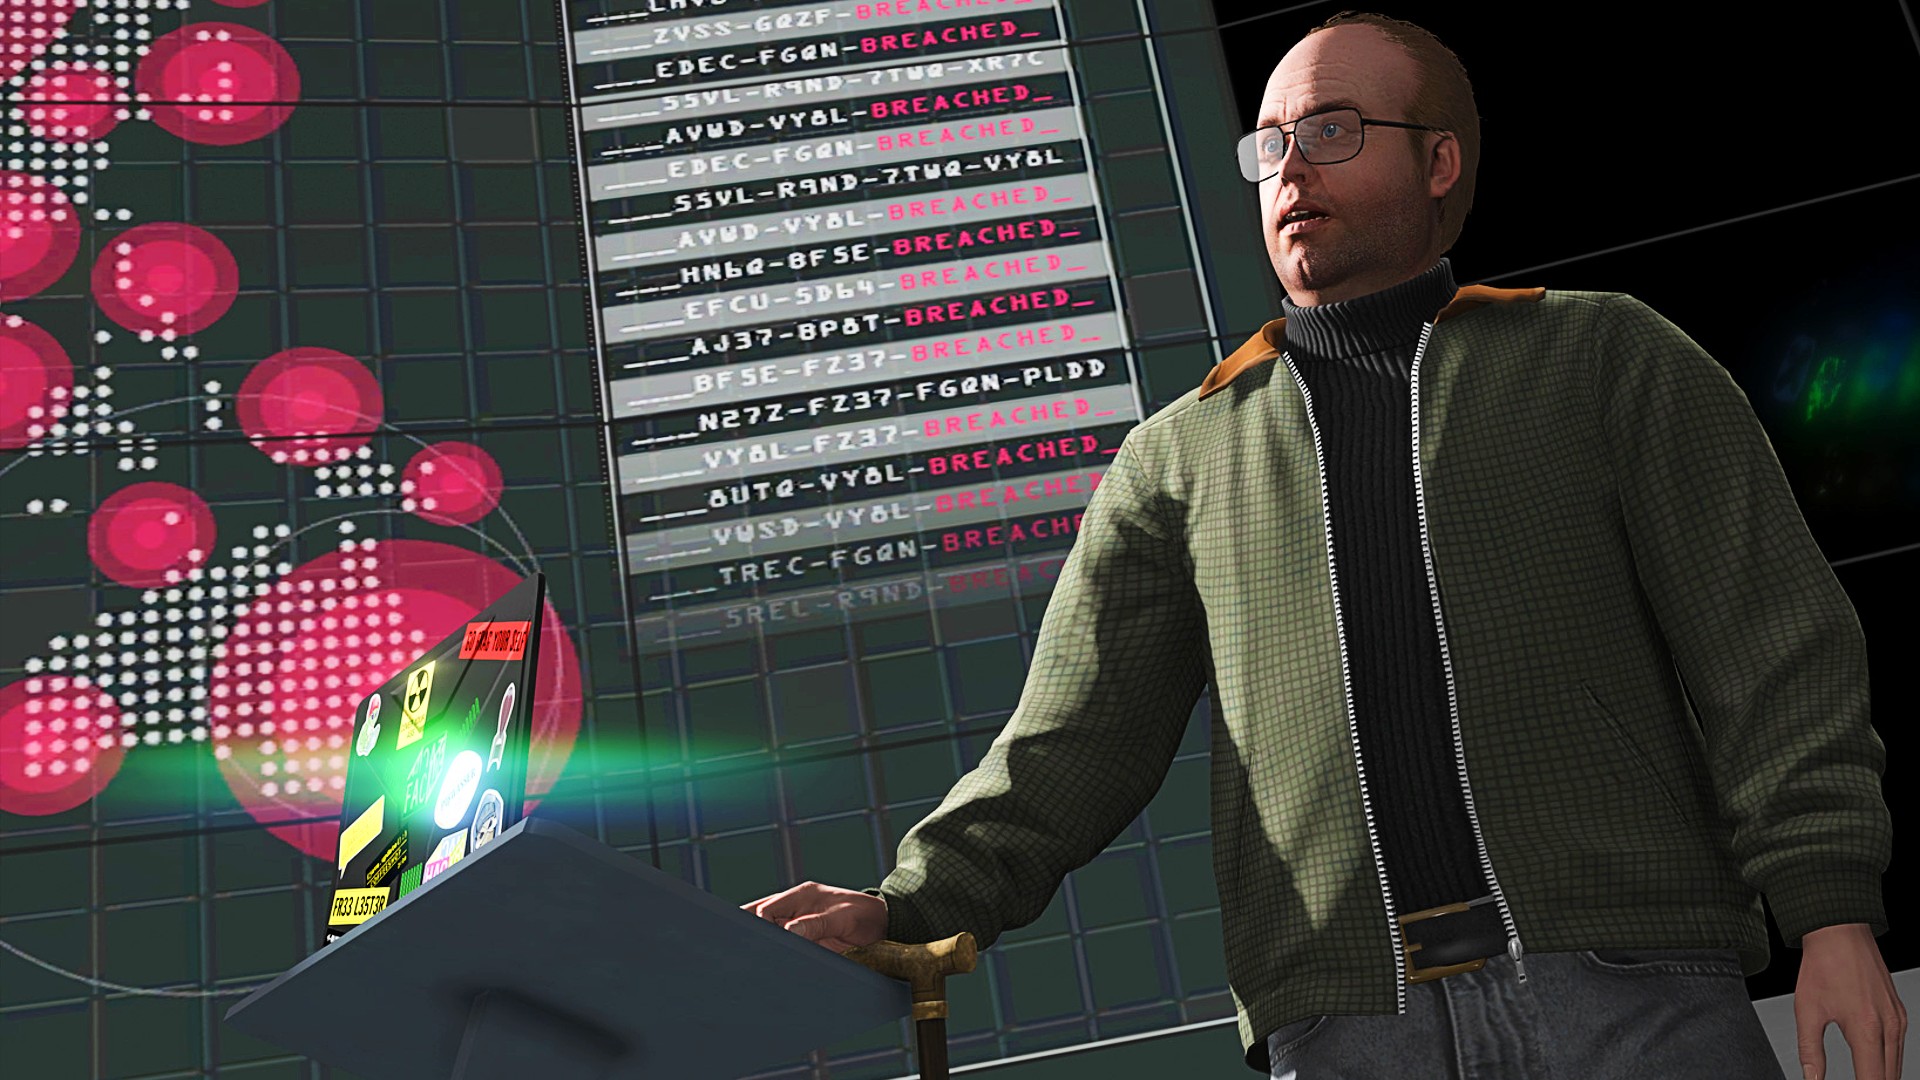 GTA Online's Lester looks shocked from behind a laptop